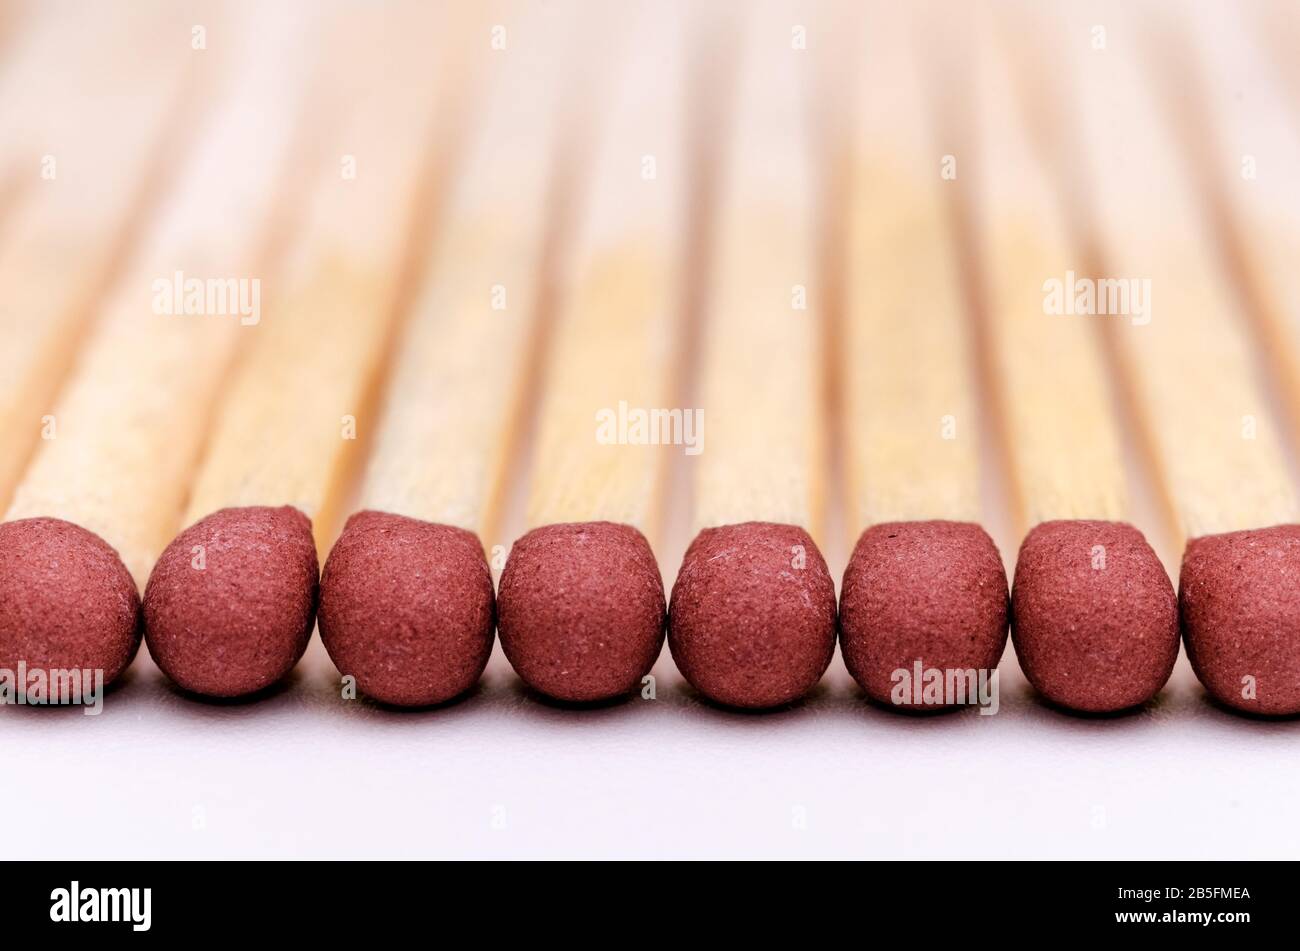 Matchsticks, close up macro of red matchstick heads against white background Stock Photo